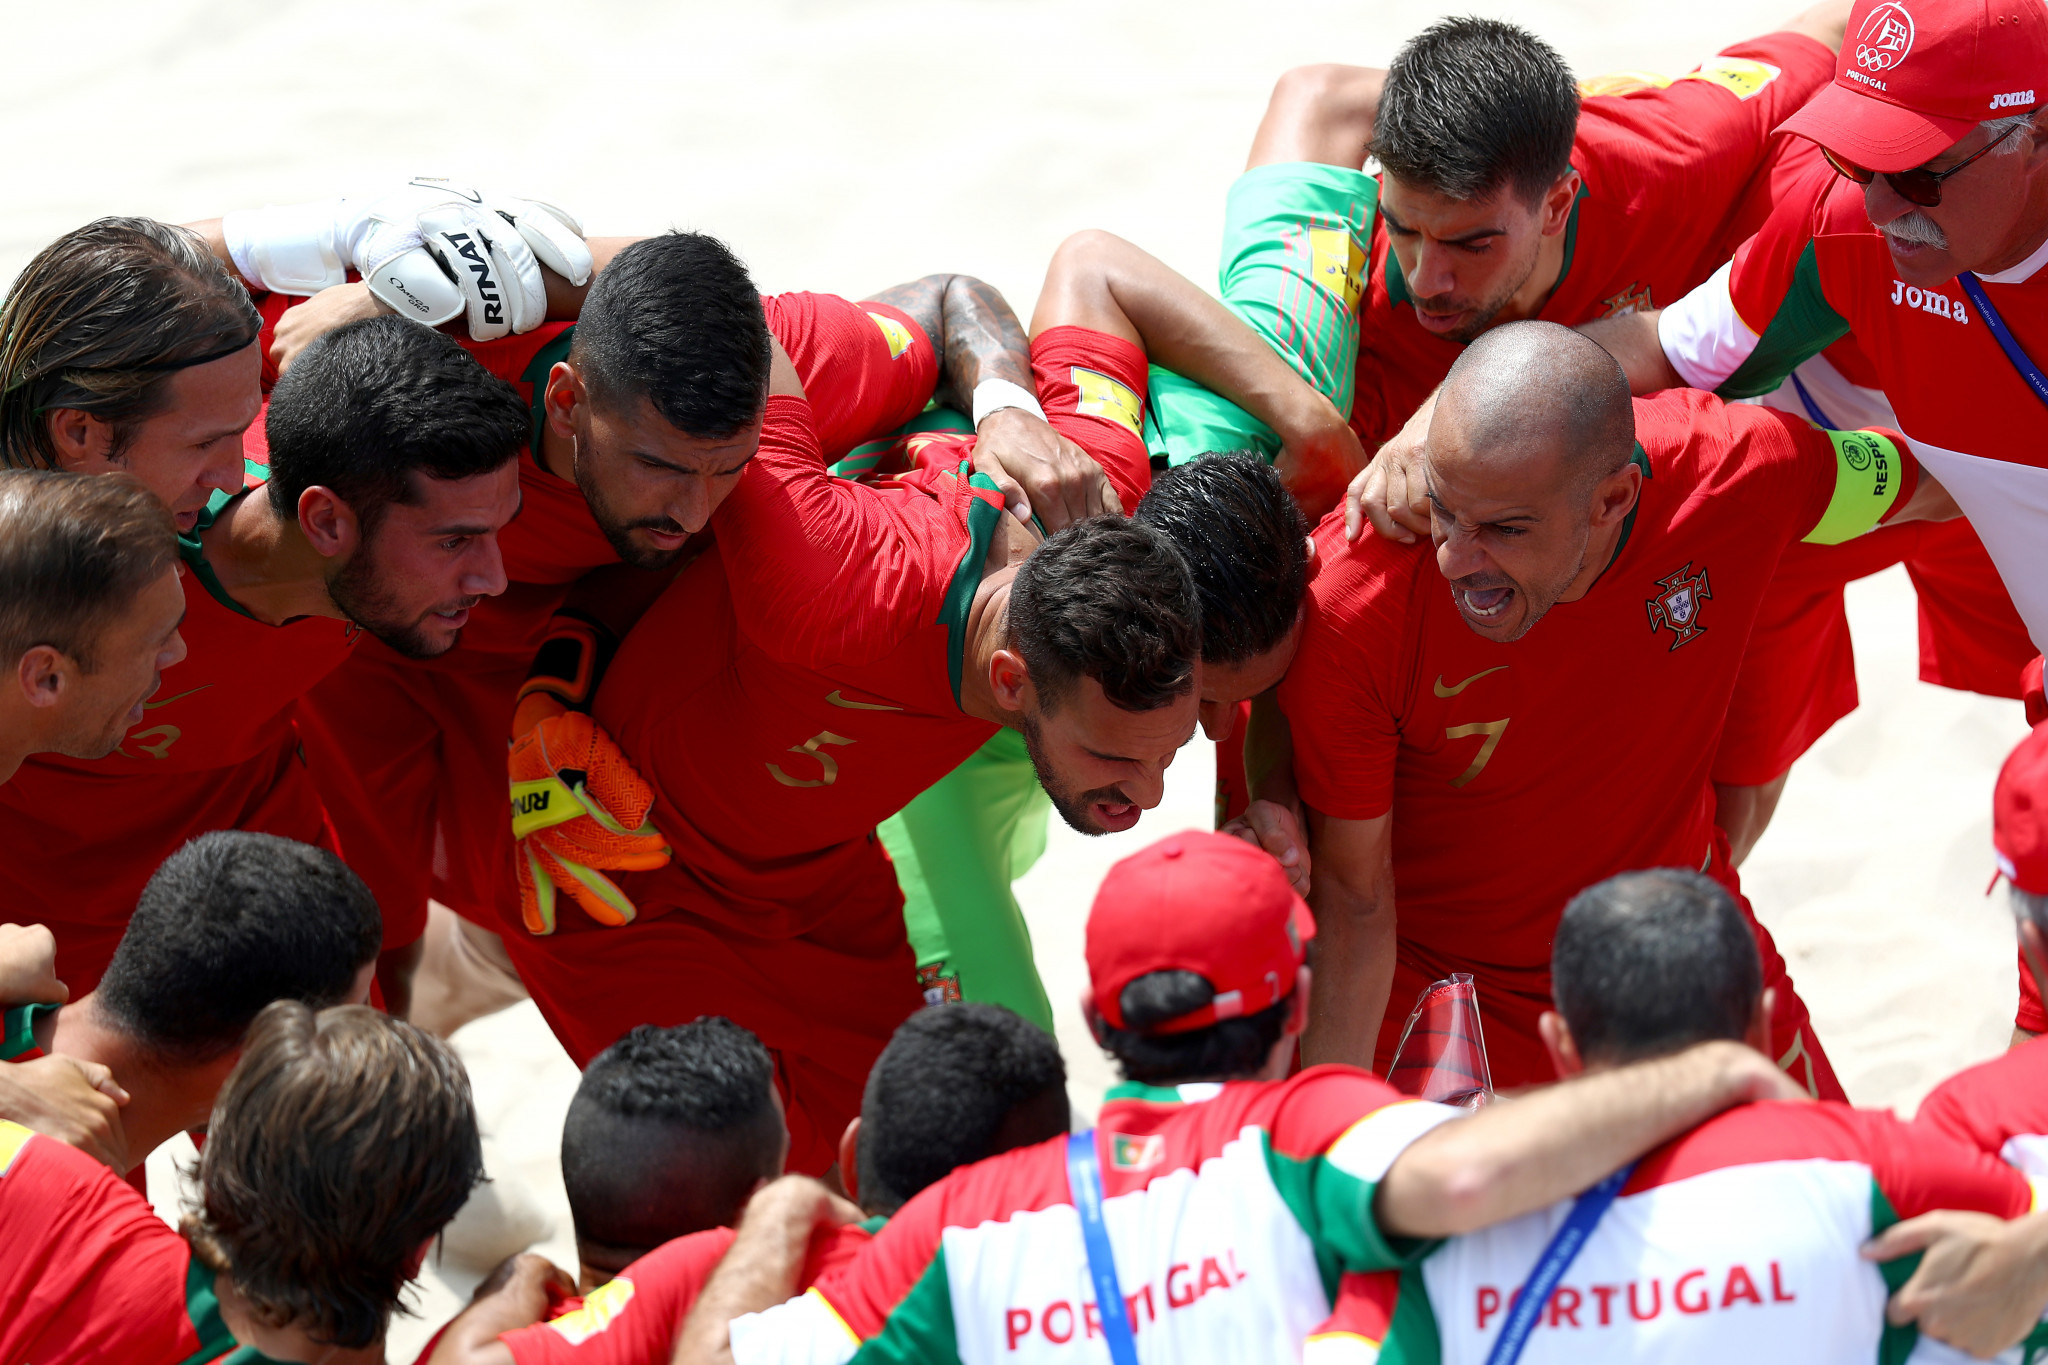 Hosts Portugal favourites for Euro Beach Soccer League Superfinal